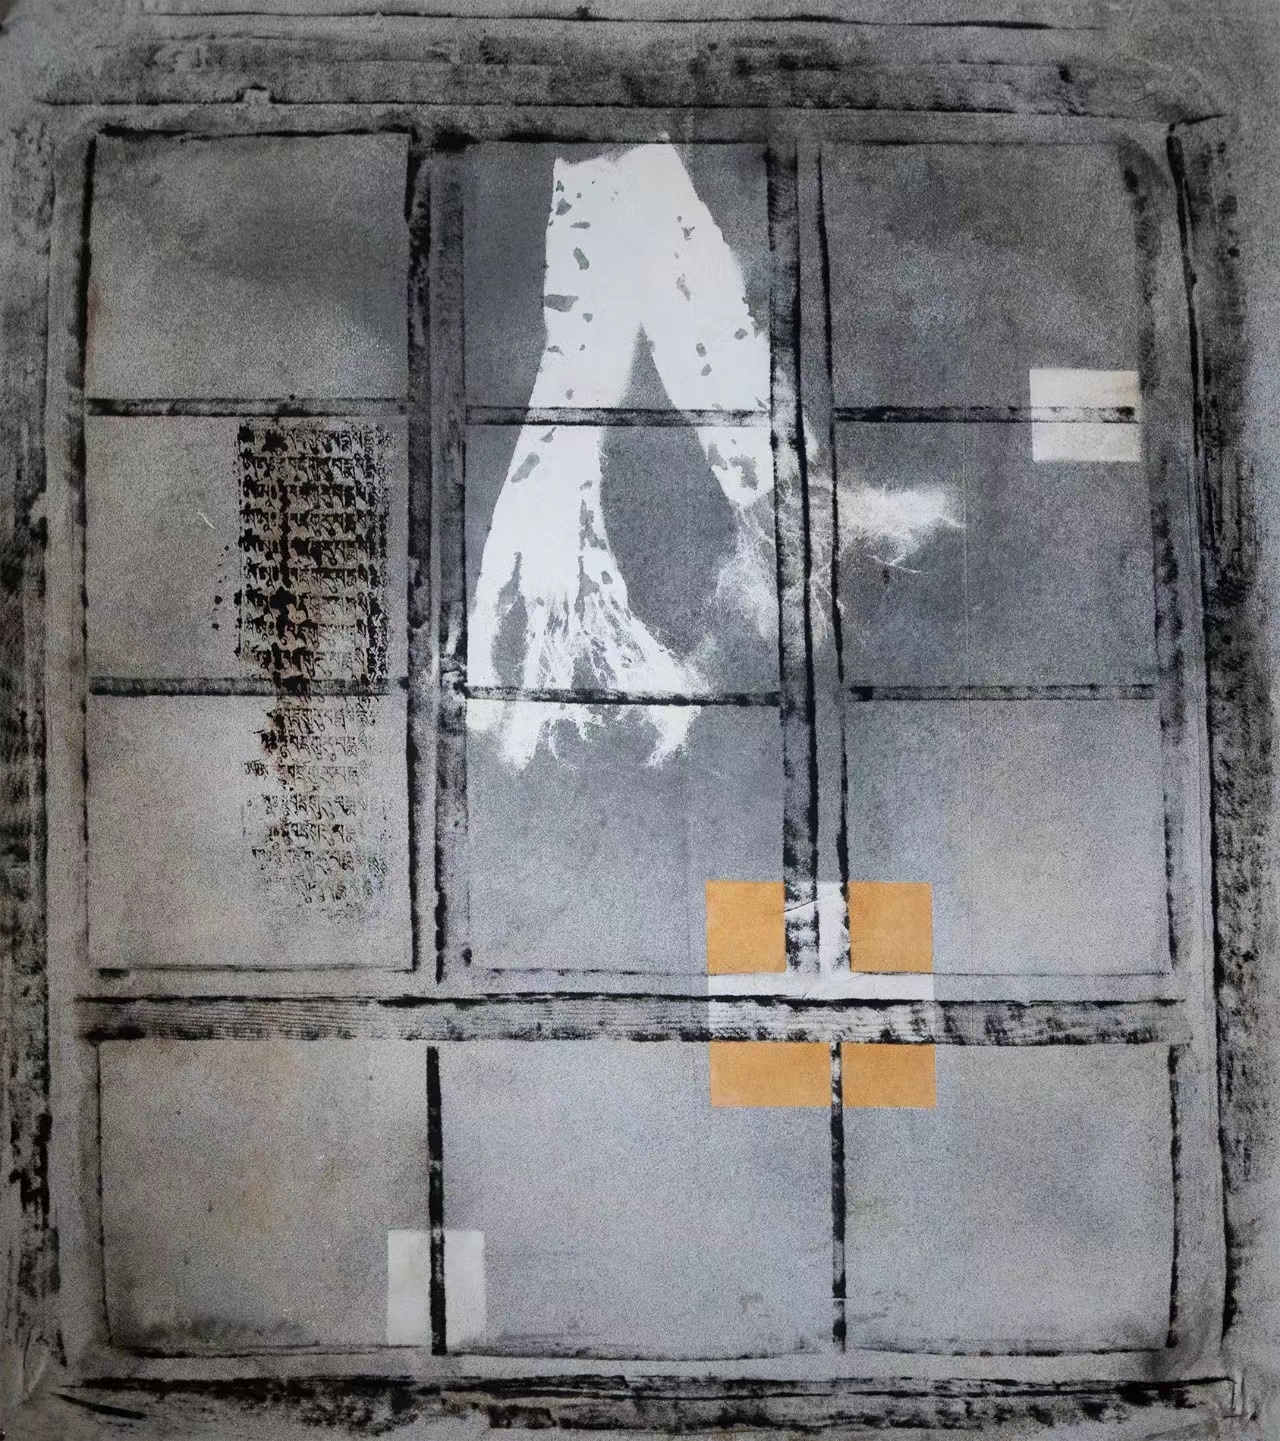 Mixed media piece in gray depicting 12-paned window with outline of scarf in white at top